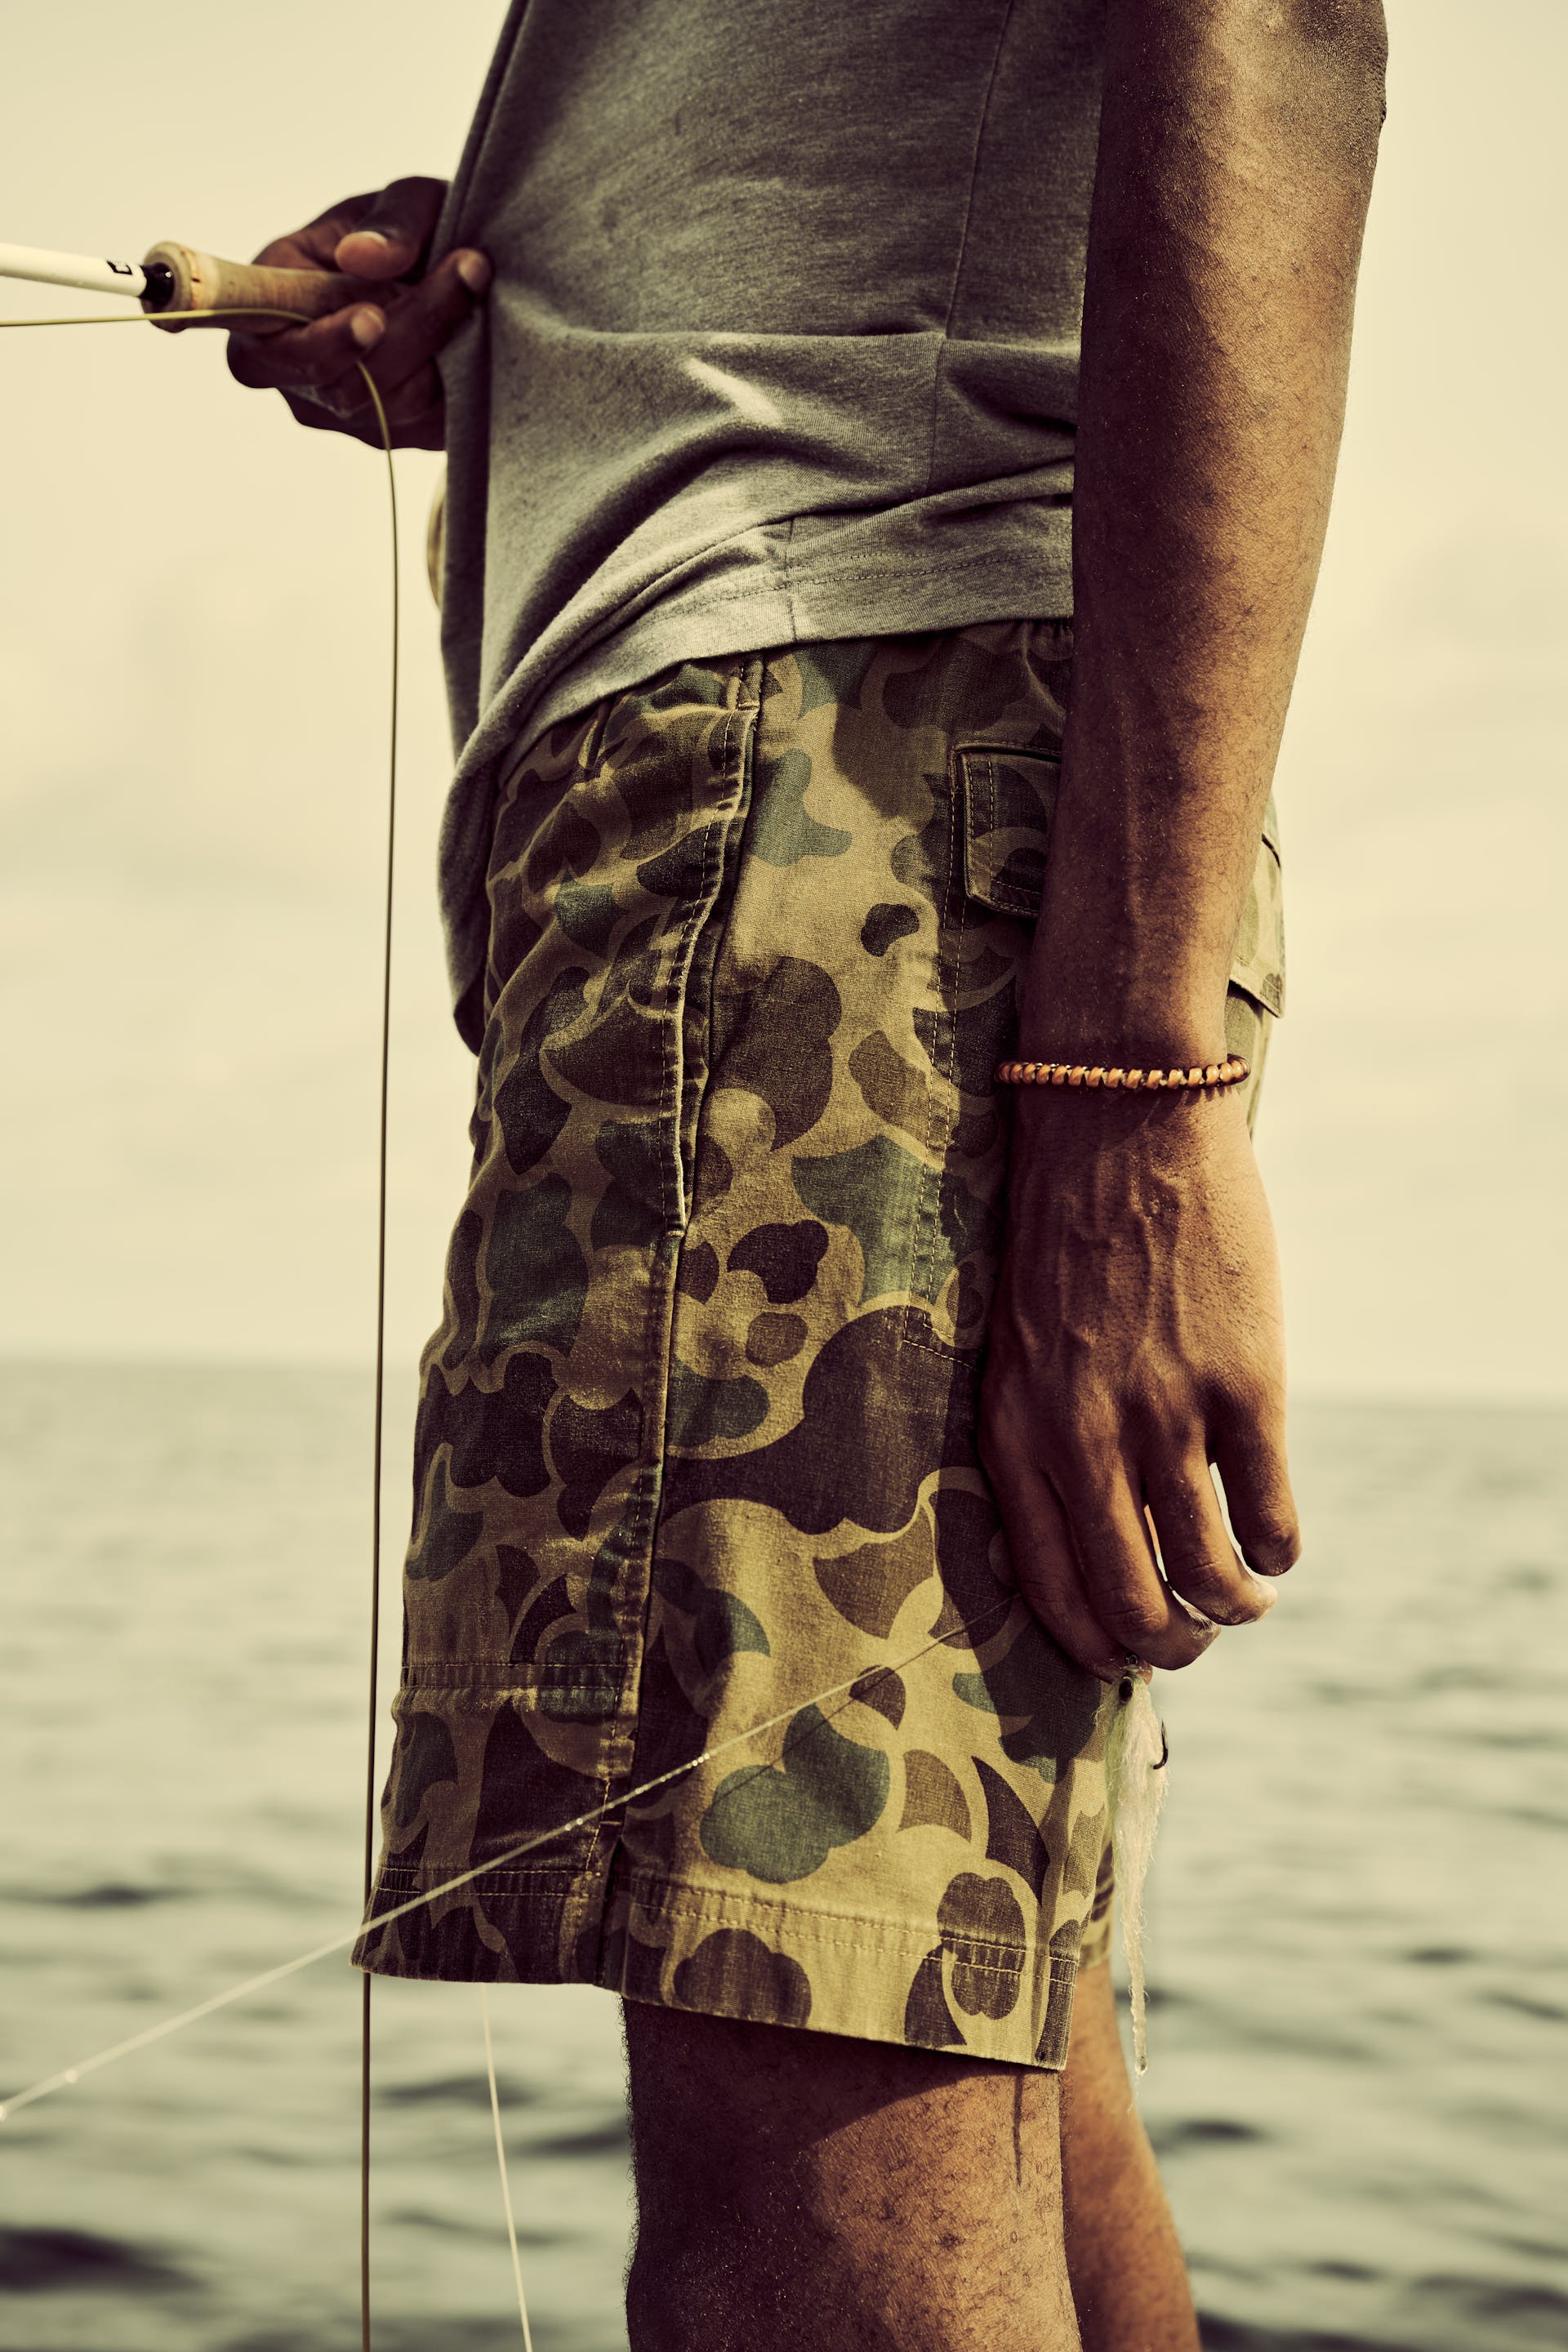 Fisherman standing on a boat holding a fishing pole wearing Filson Dry Falls Shorts in surplus shrub camo